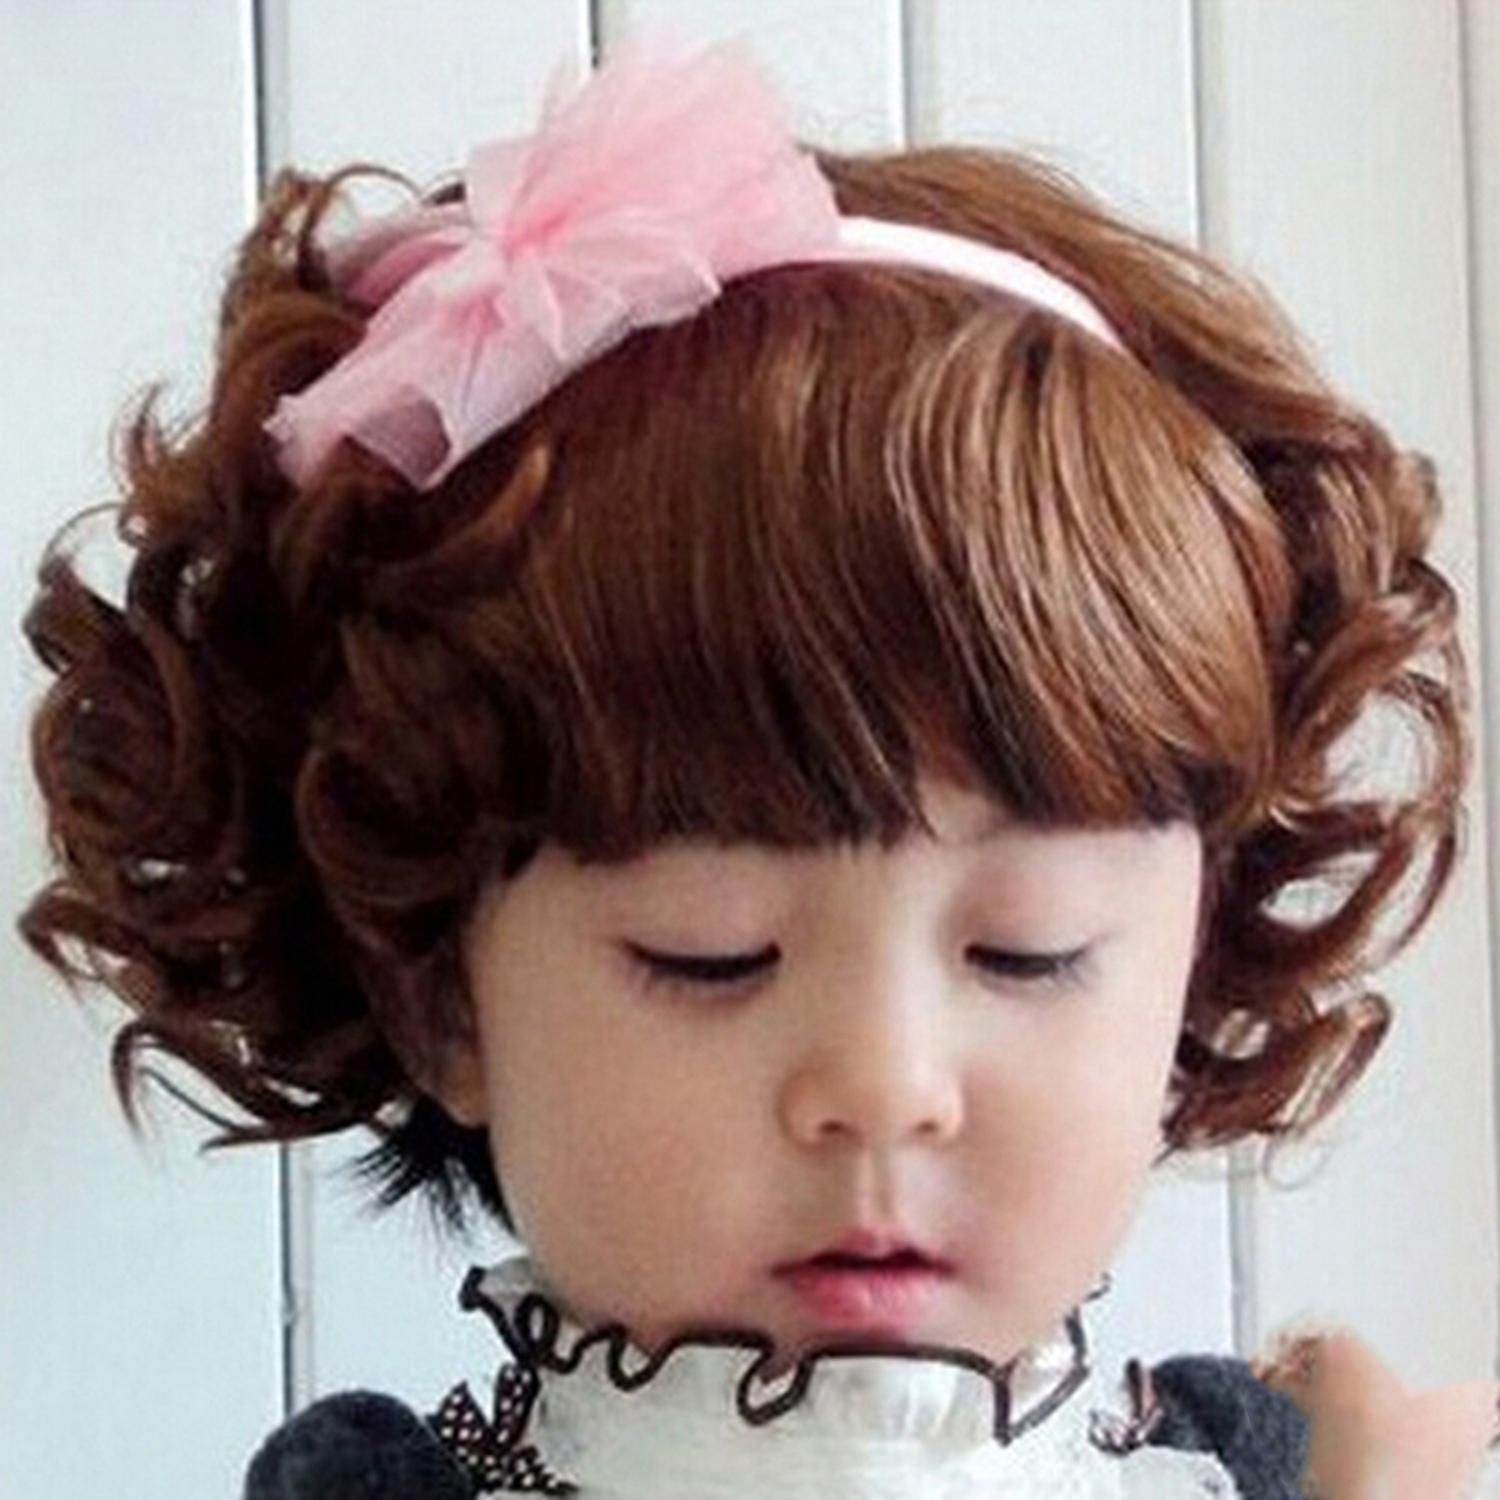 Lovely Boys Girls Hair Wig Full Head Children Wigs Kids Daily Hairpiece -  Buy Lovely Boys Girls Hair Wig Full Head Children Wigs Kids Daily Hairpiece  Online at Low Price - Snapdeal